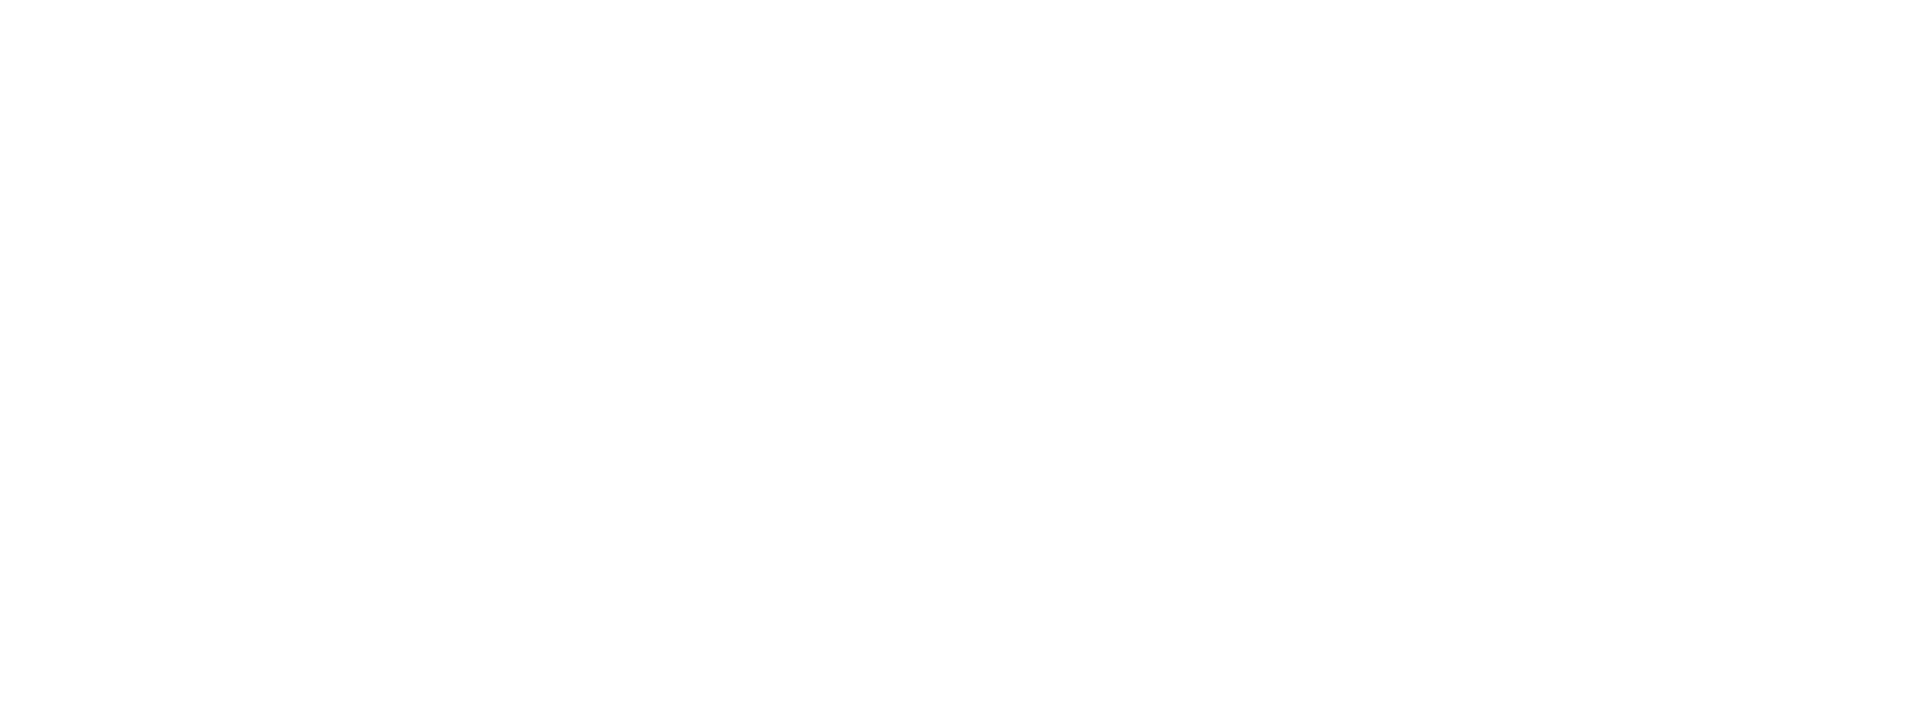 GUAP – The World's First Video Magazine